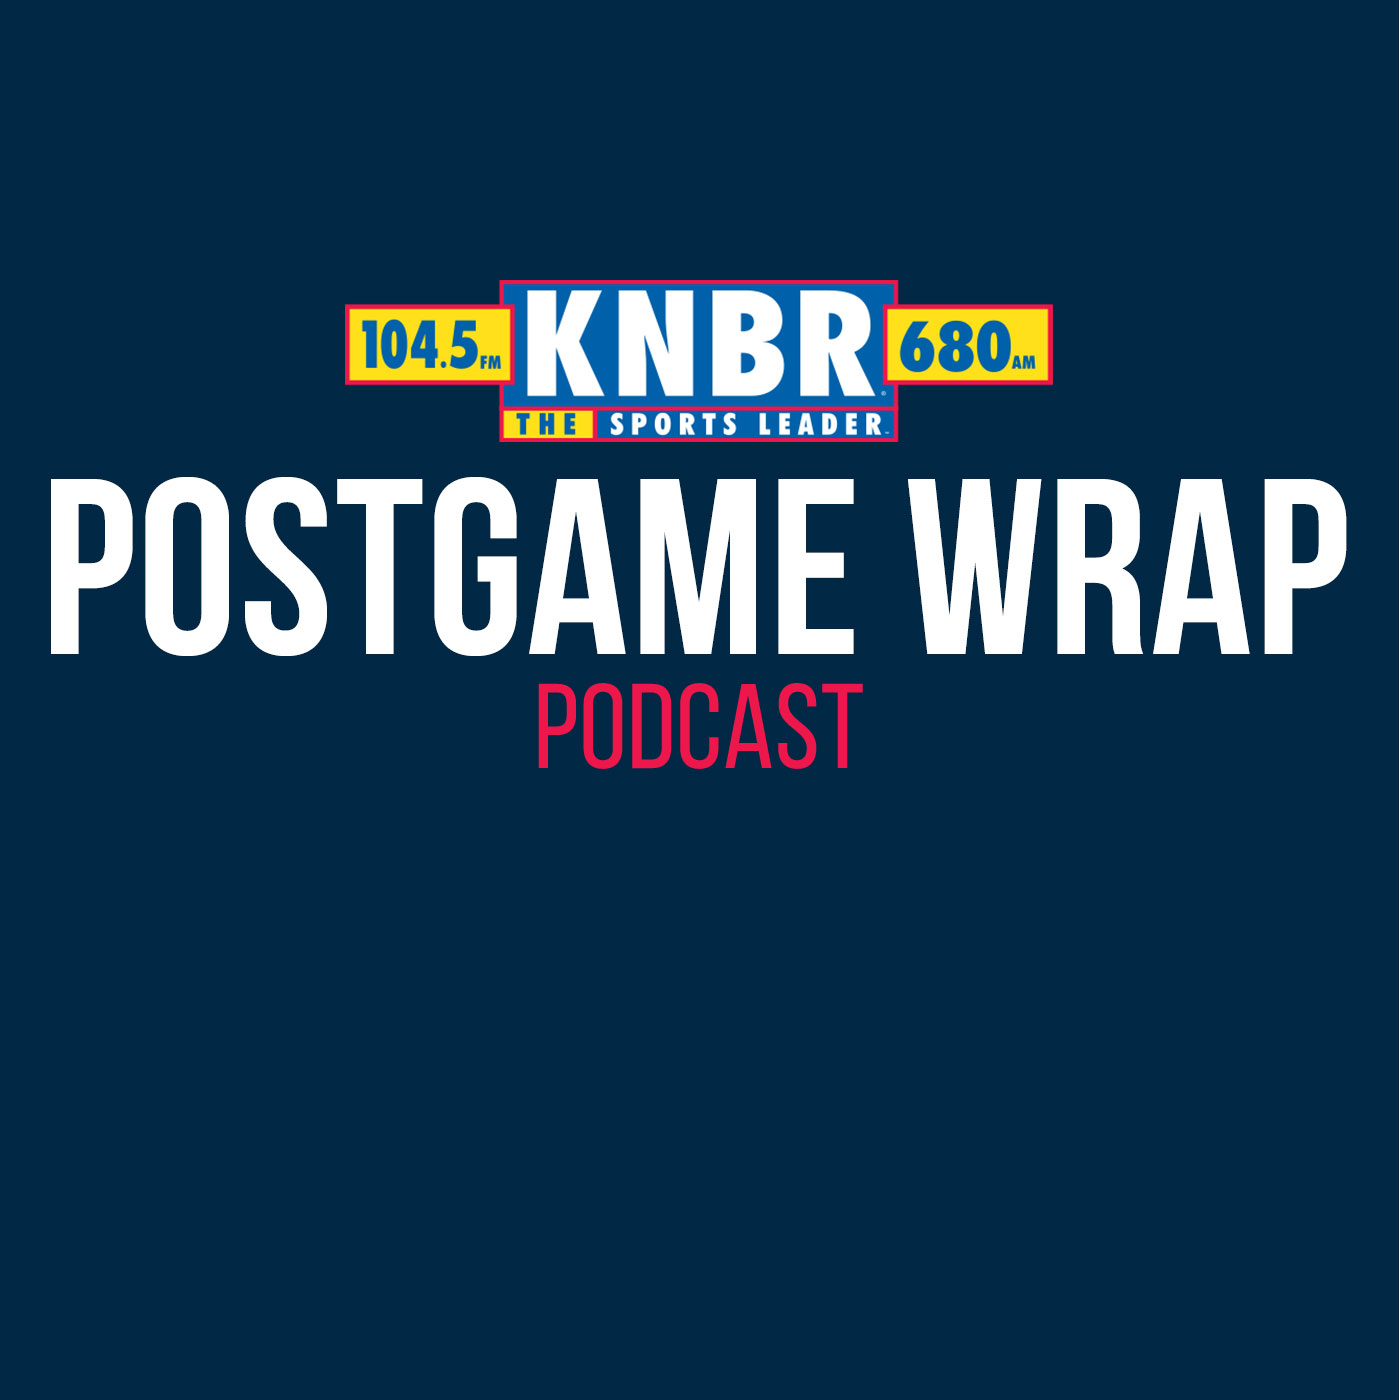 6-5 Postgame Wrap: Giants 4, Cubs 3